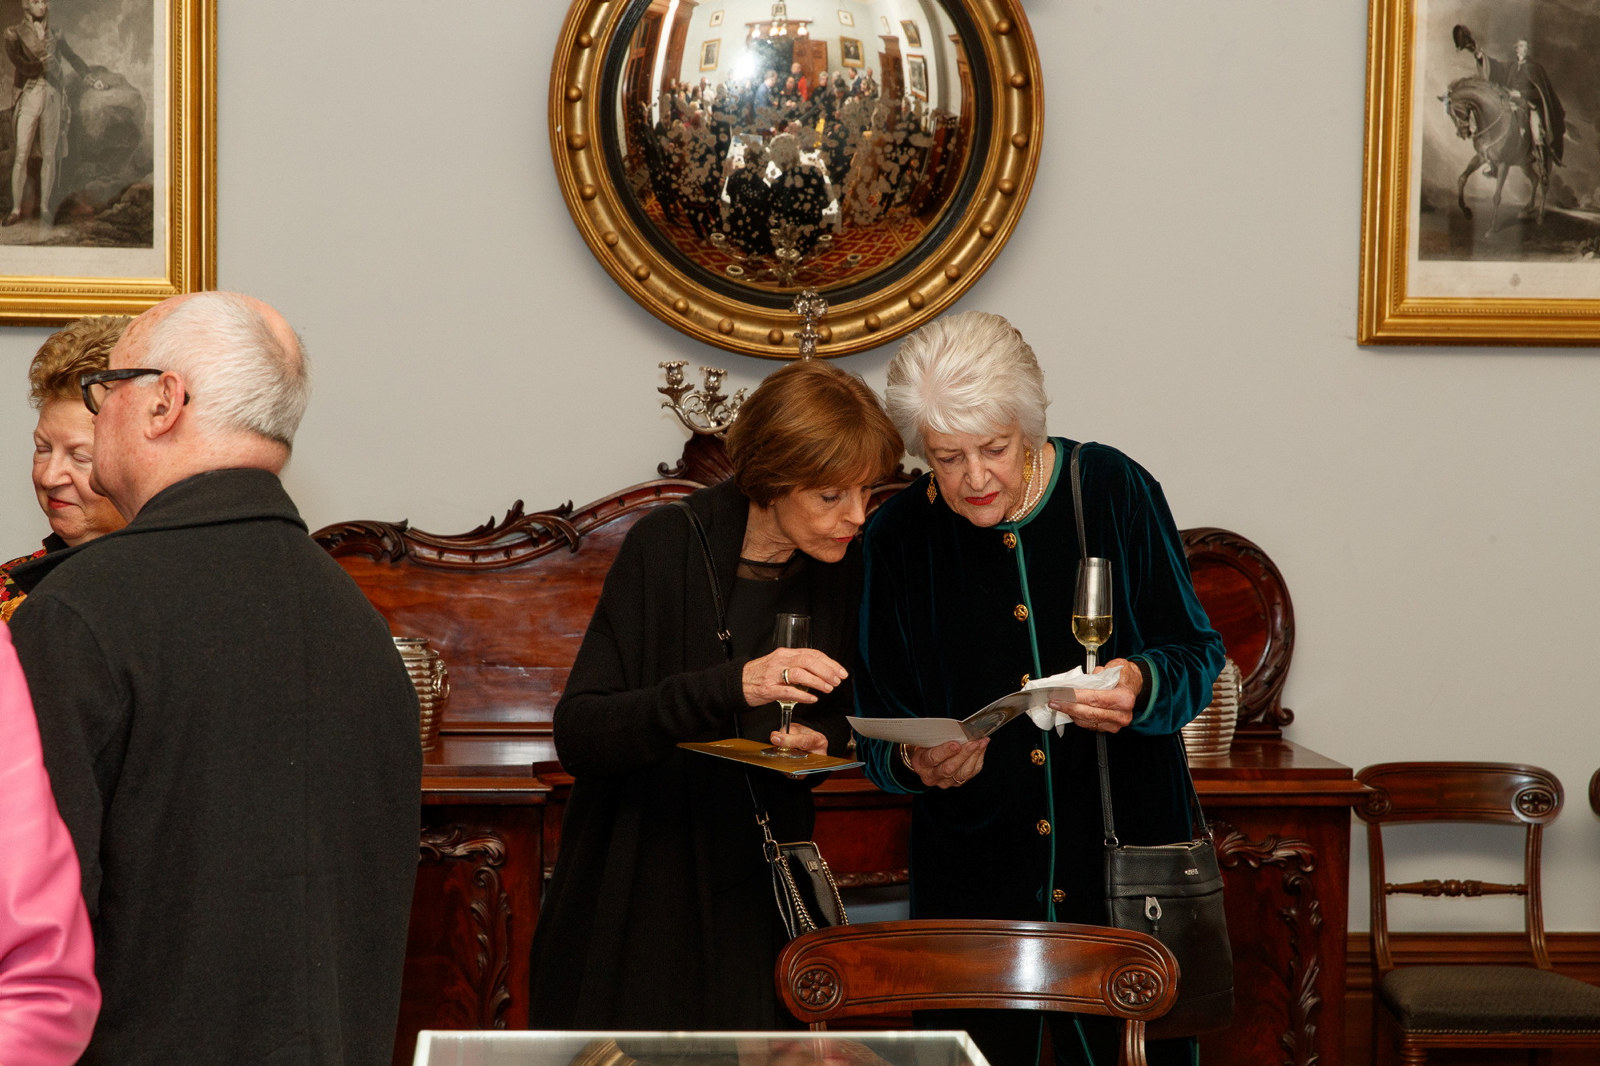 Margot Chinneck and Jennifer Fisher examine the program at the Bel Canto in the Bush recital